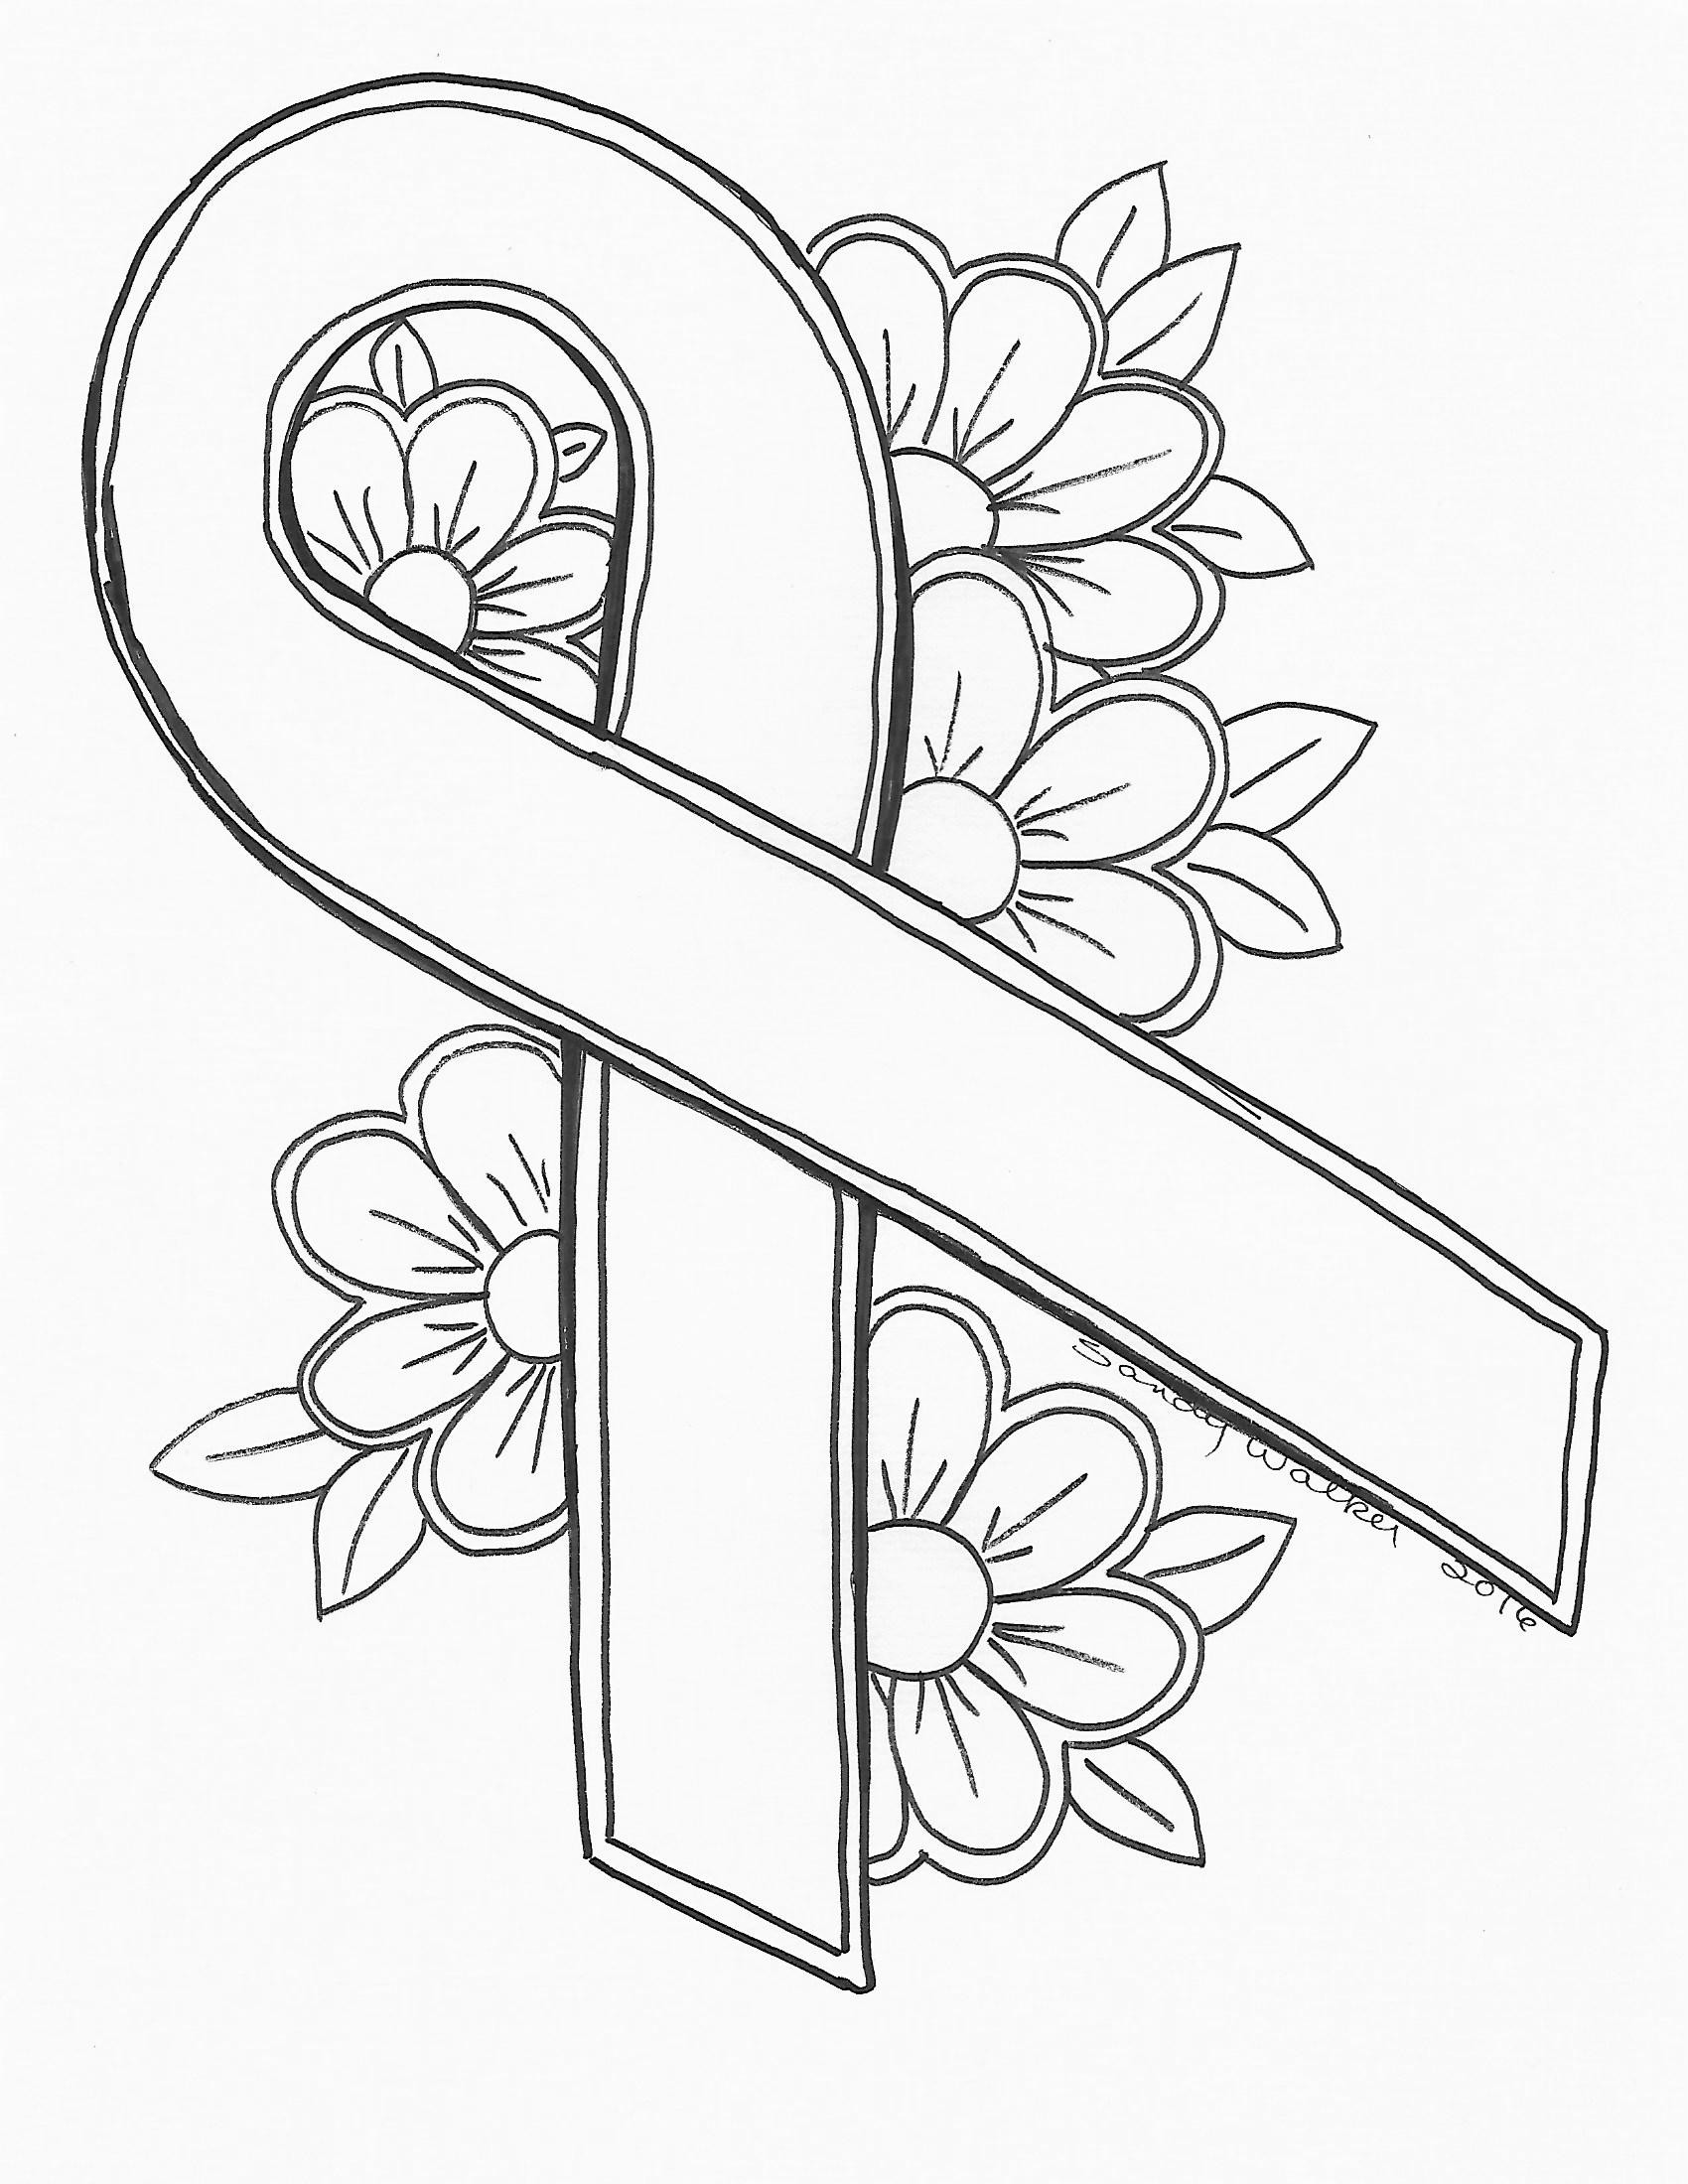 Free Coloring Pages Breast Cancer Awareness
 Breast Cancer Drawing at GetDrawings